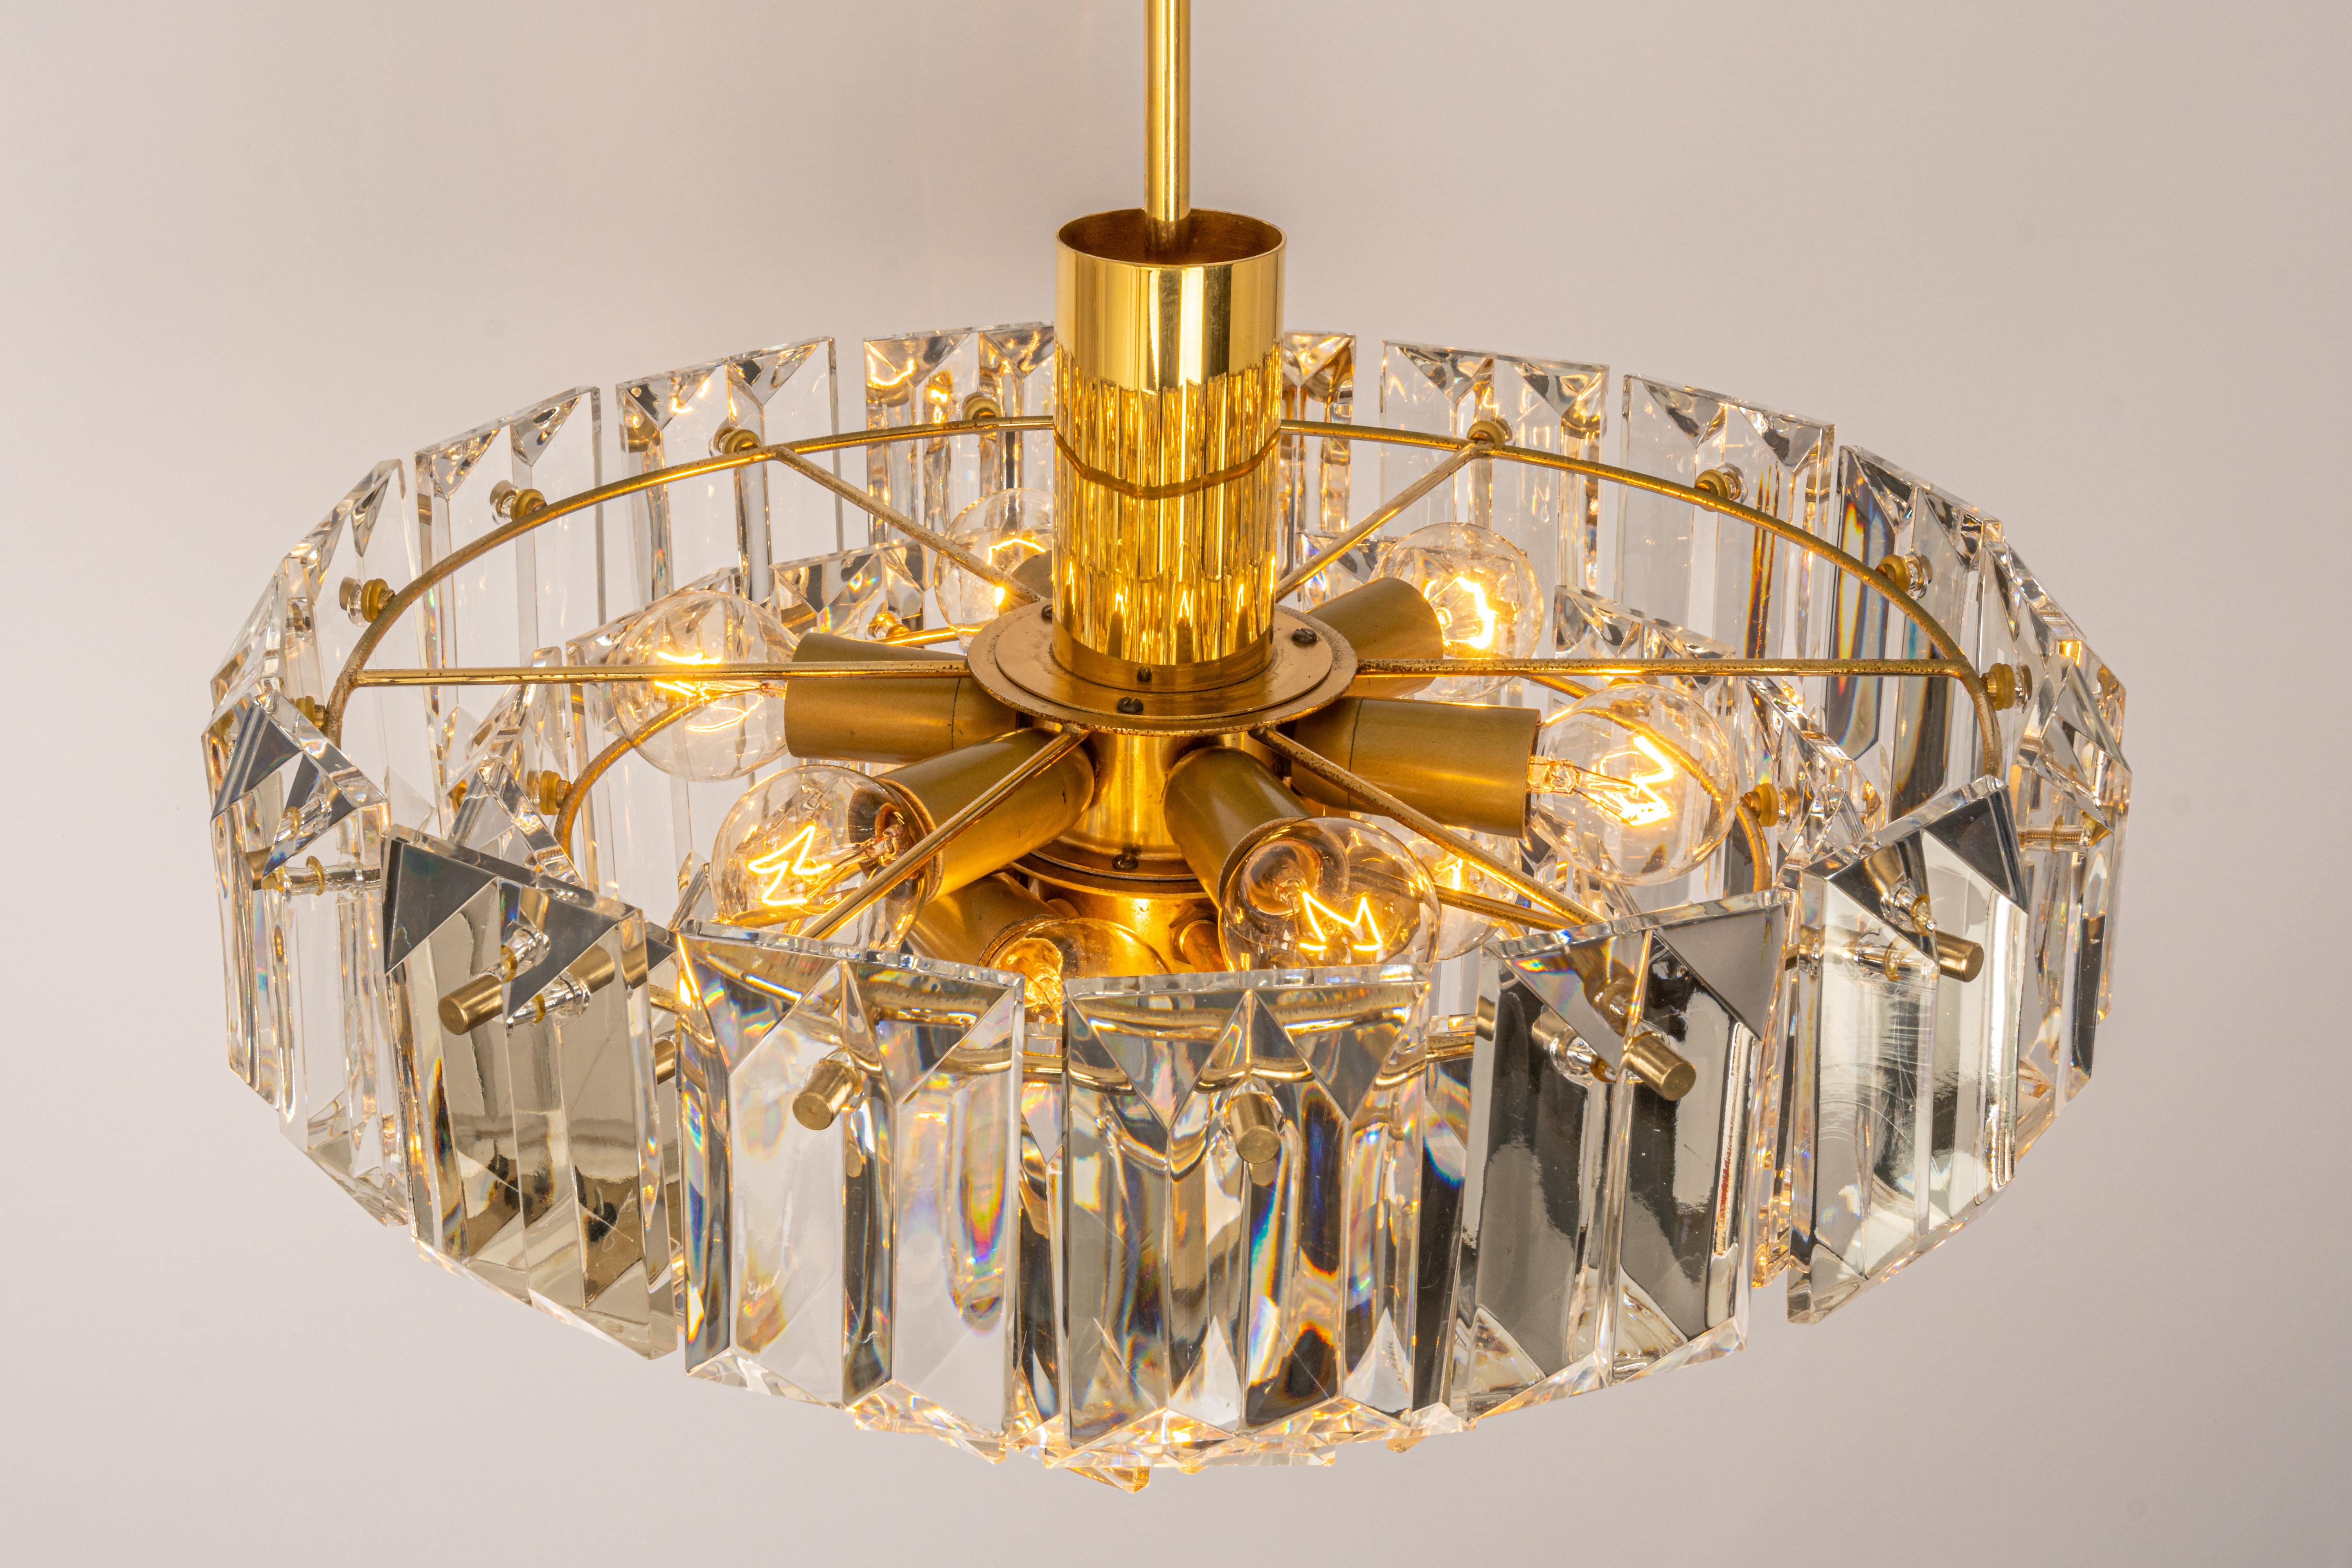 Stunning Chandelier, Brass and Crystal Glass by Kinkeldey, Germany, 1970s For Sale 2